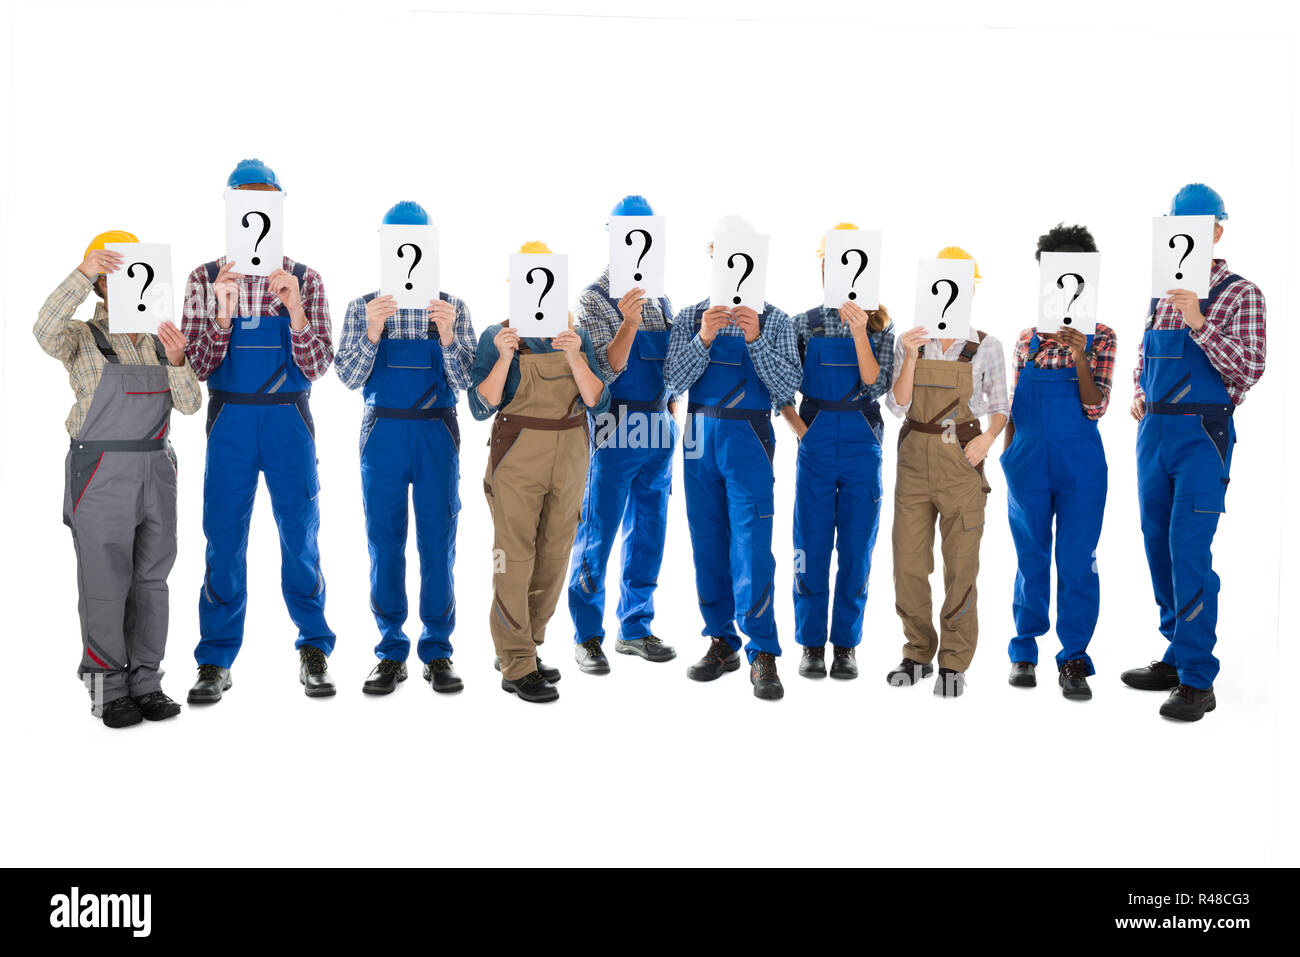 Construction Workers Hiding Faces With Question Mark Signs Stock Photo